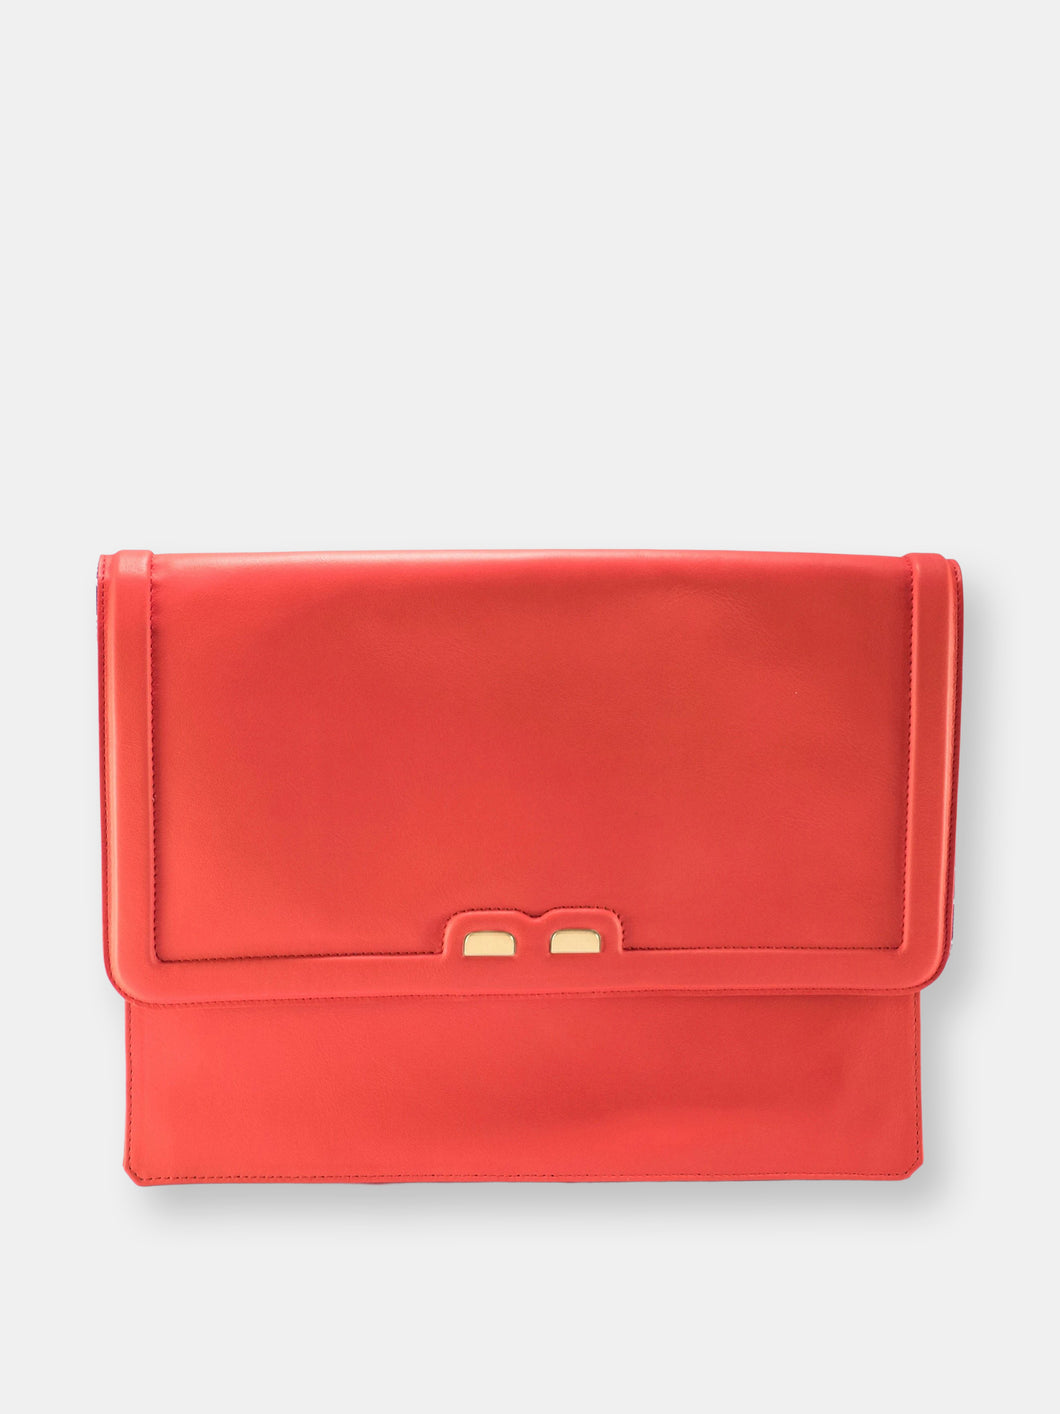 Caffery in Coral Red